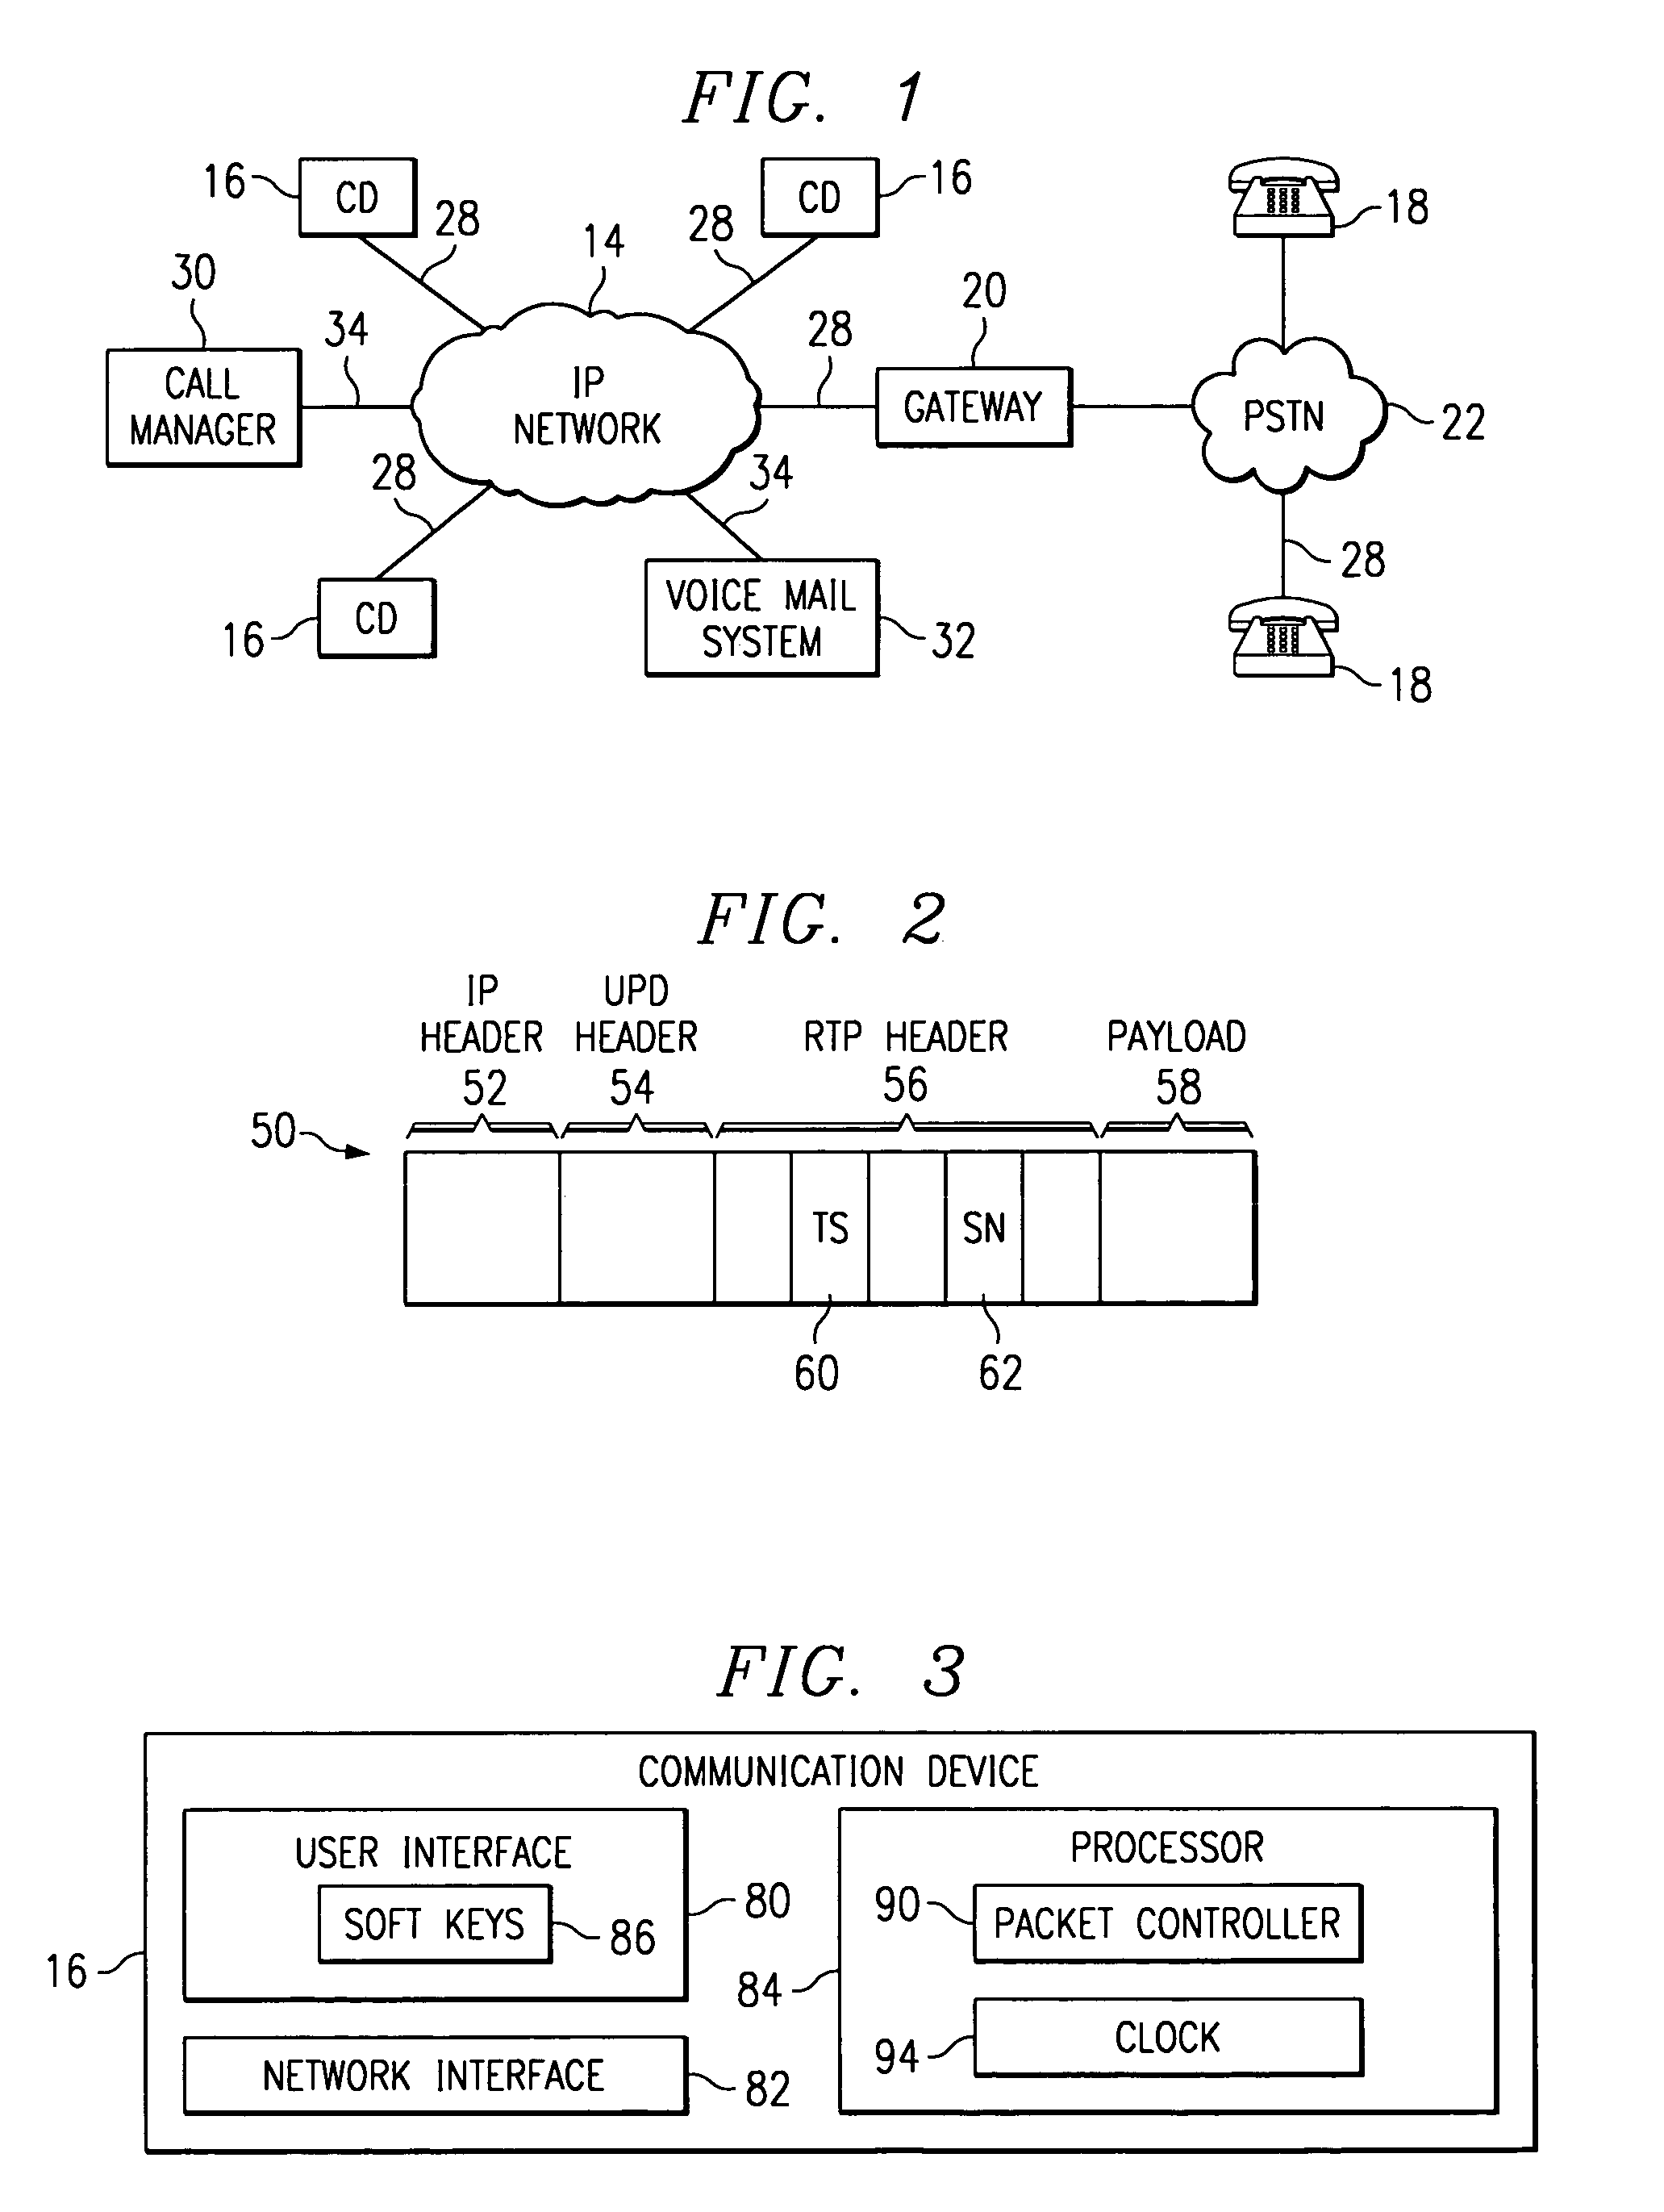 Method and system for call answer while connected to voice mail